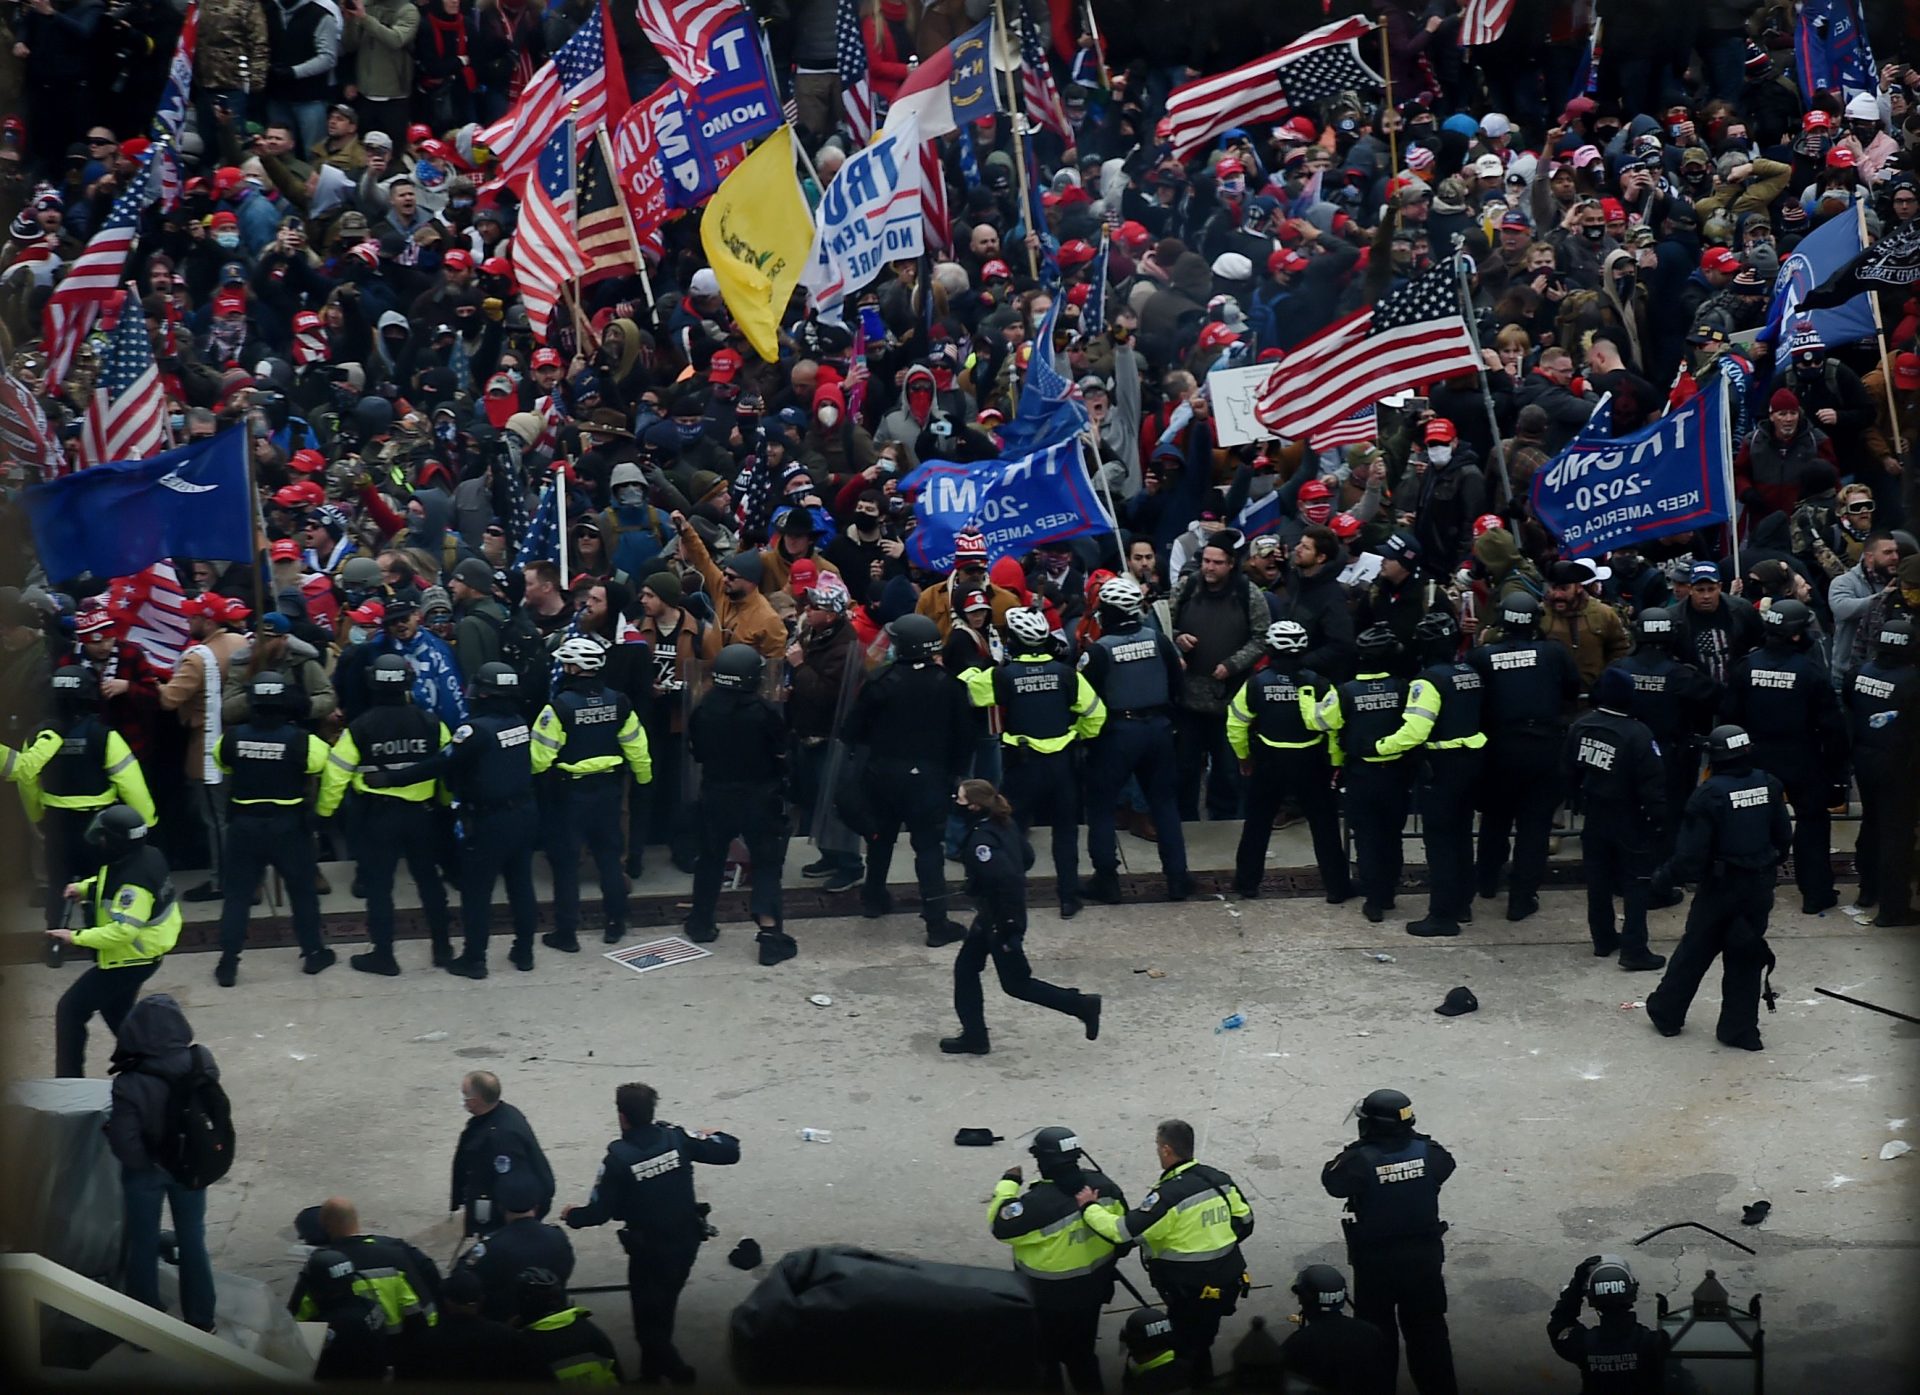 Police establish a line to hold back protesters as they gather outside the US Capitol's Rotunda on January 6, 2021, in Washington, DC. (Image: OLIVIER DOULIERY/AFP via Getty Images)